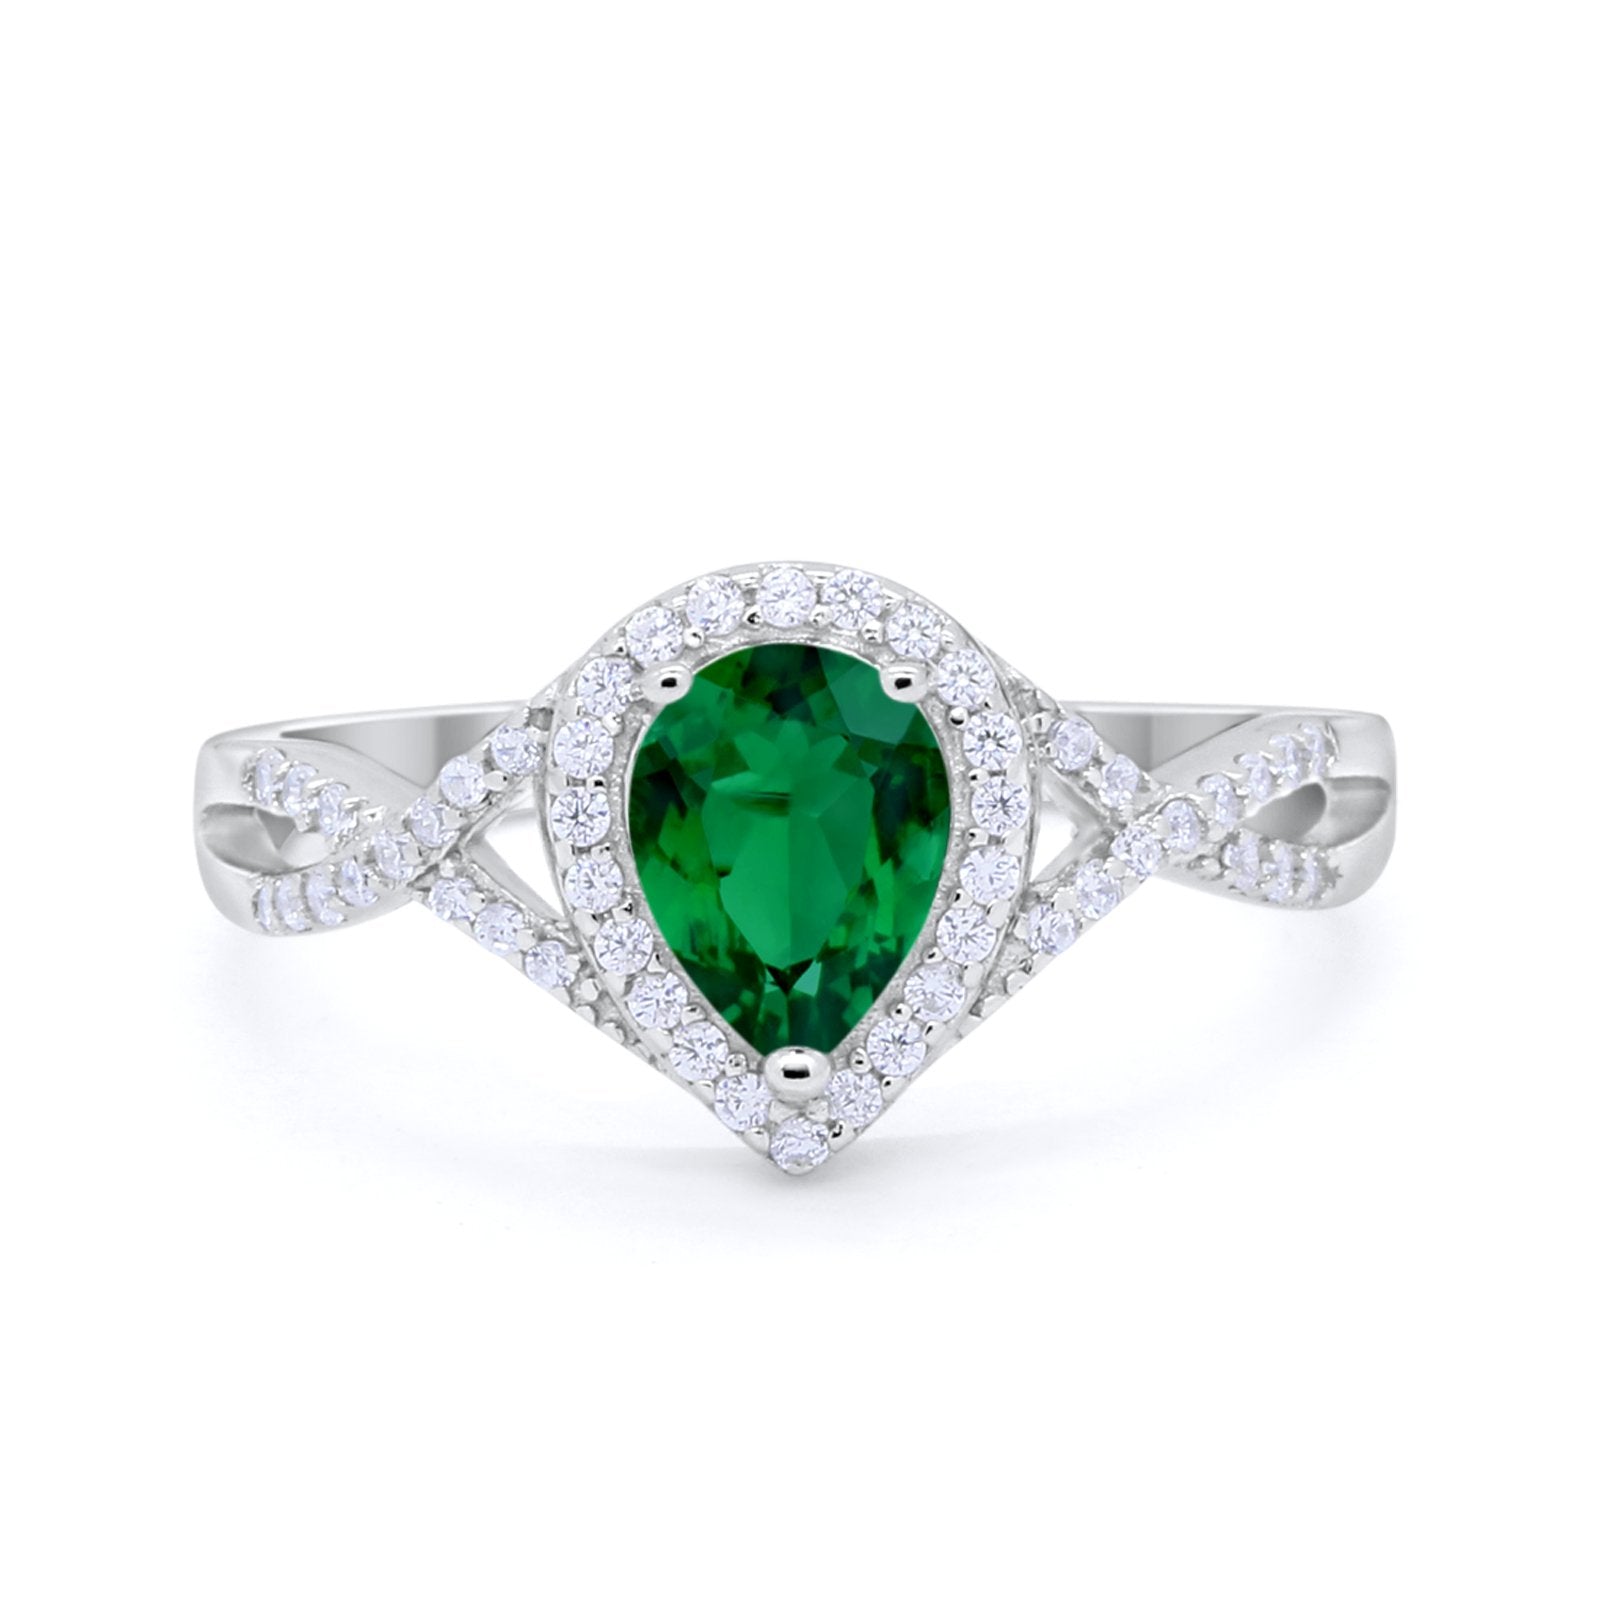 Teardrop Wedding Promise Ring Infinity Round Simulated Green Emerald CZ 925 Sterling Silver